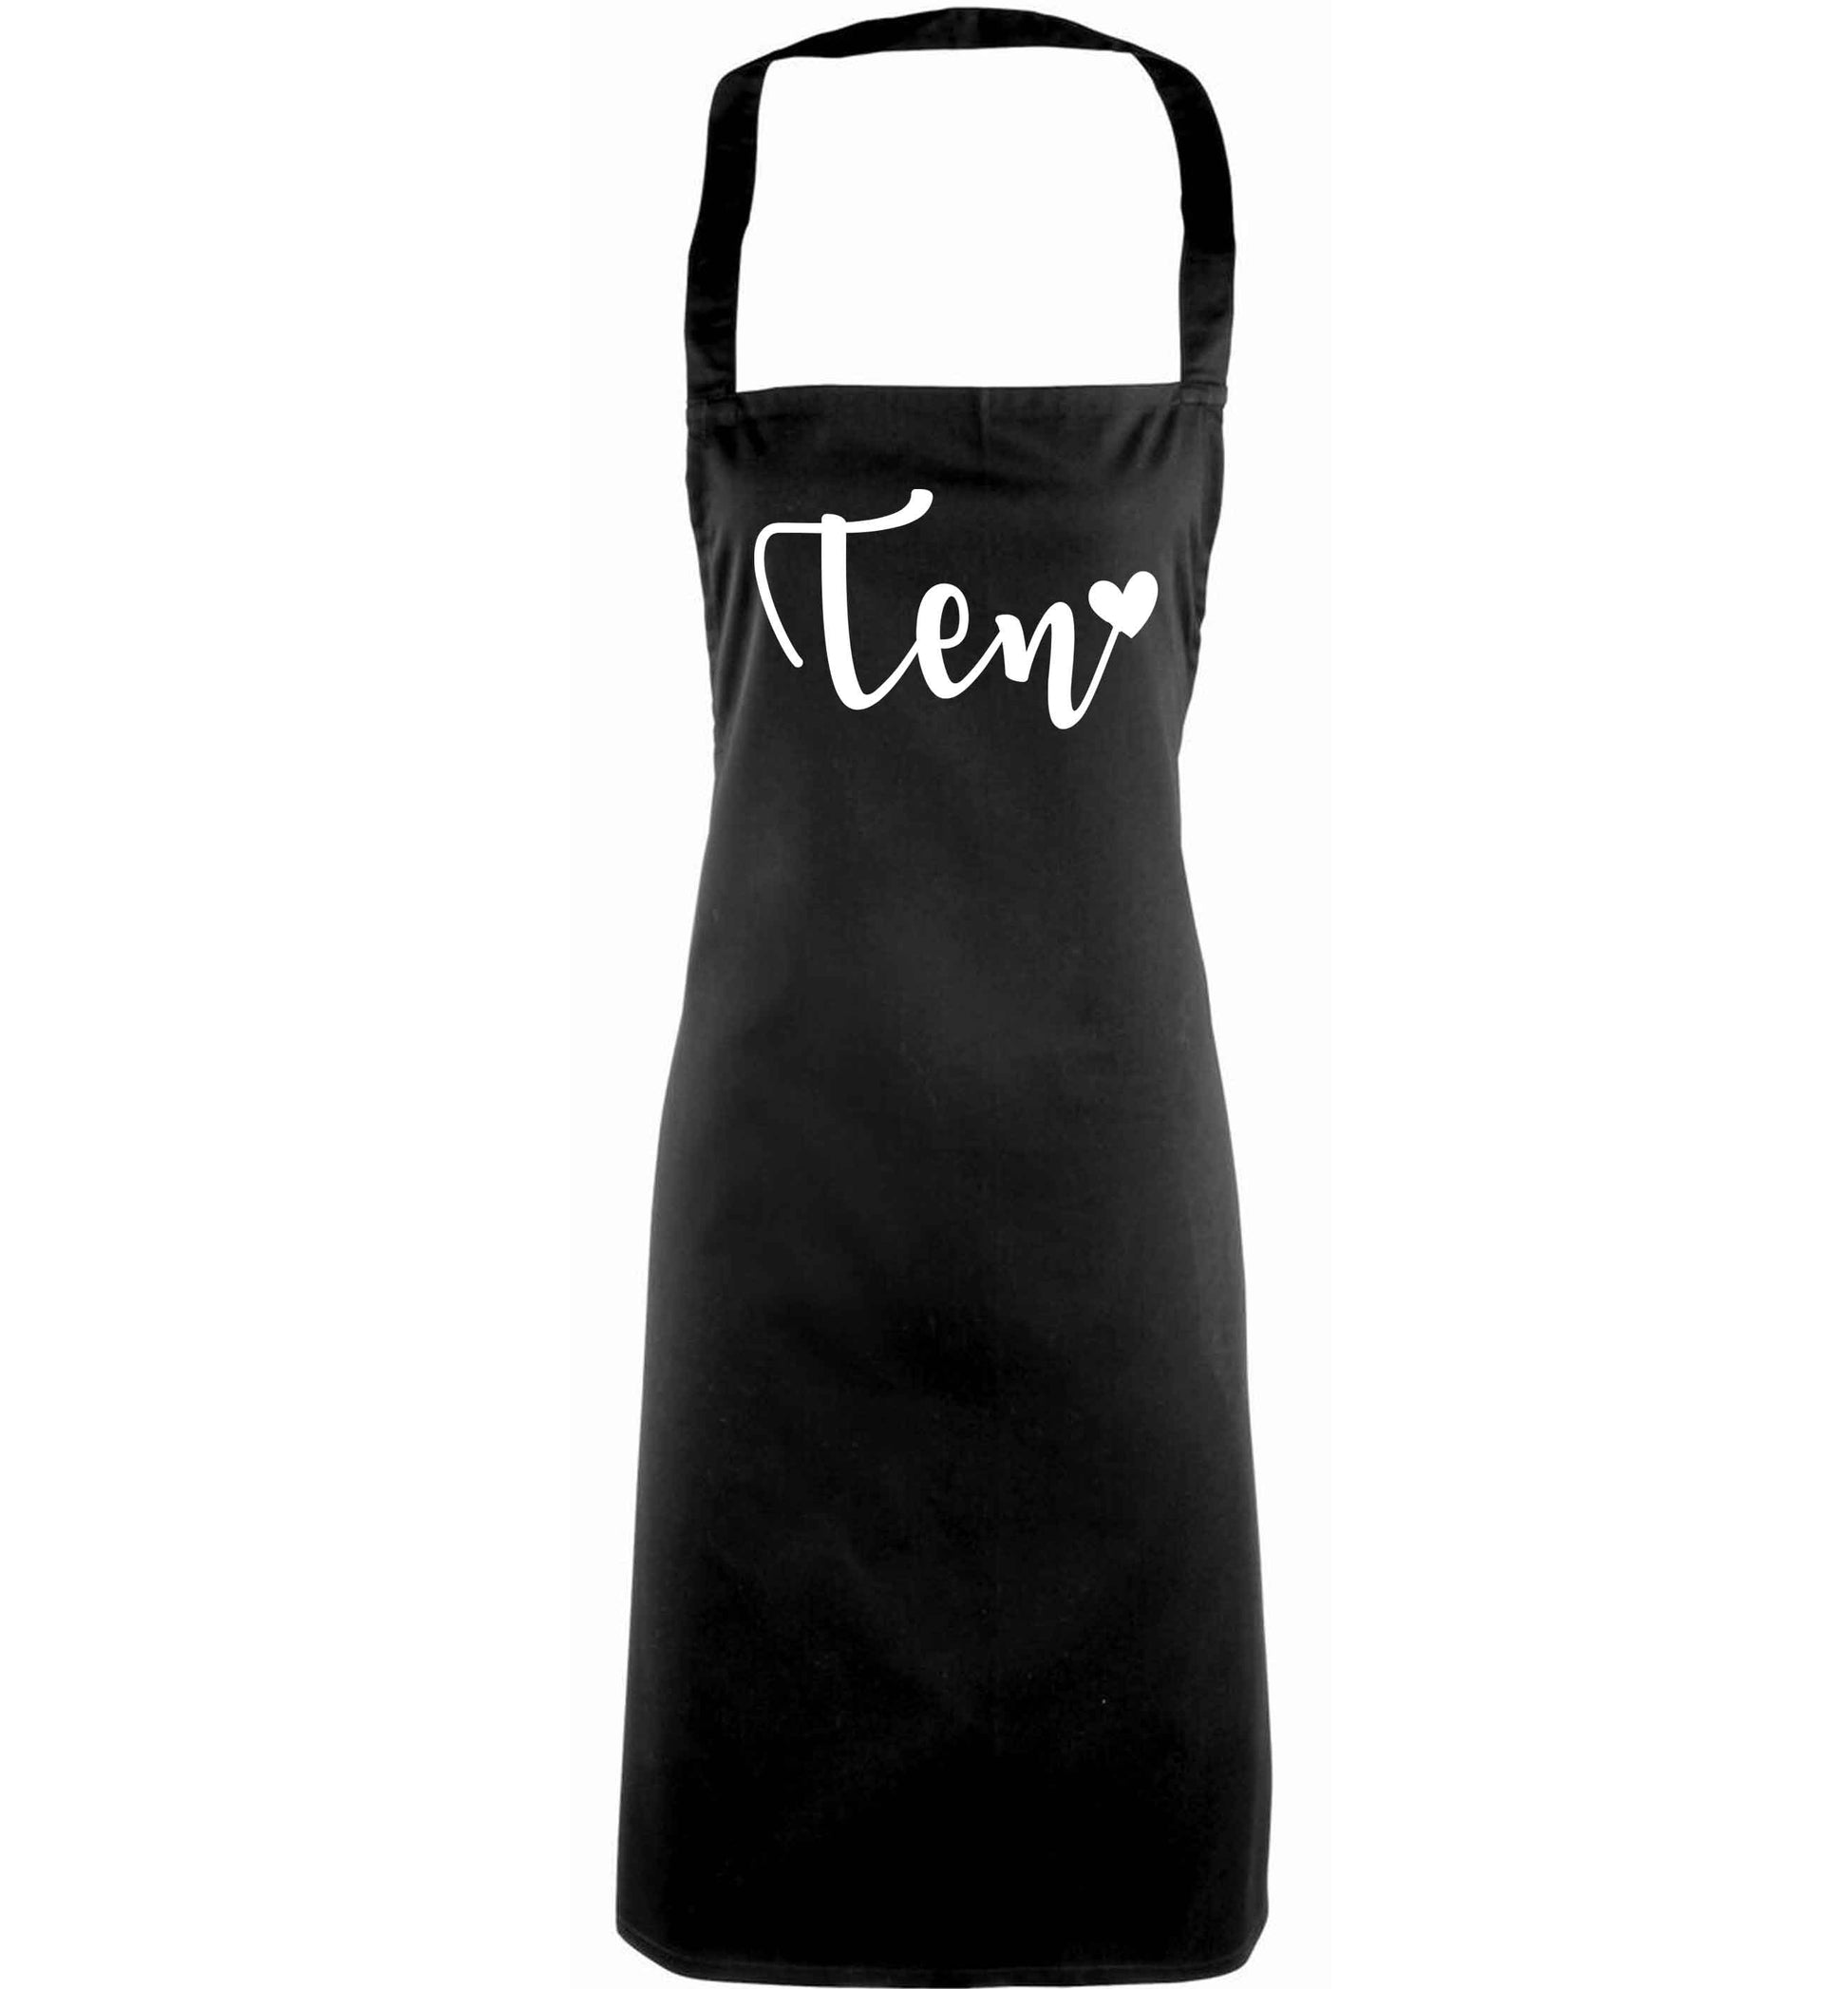 Ten and heart adults black apron